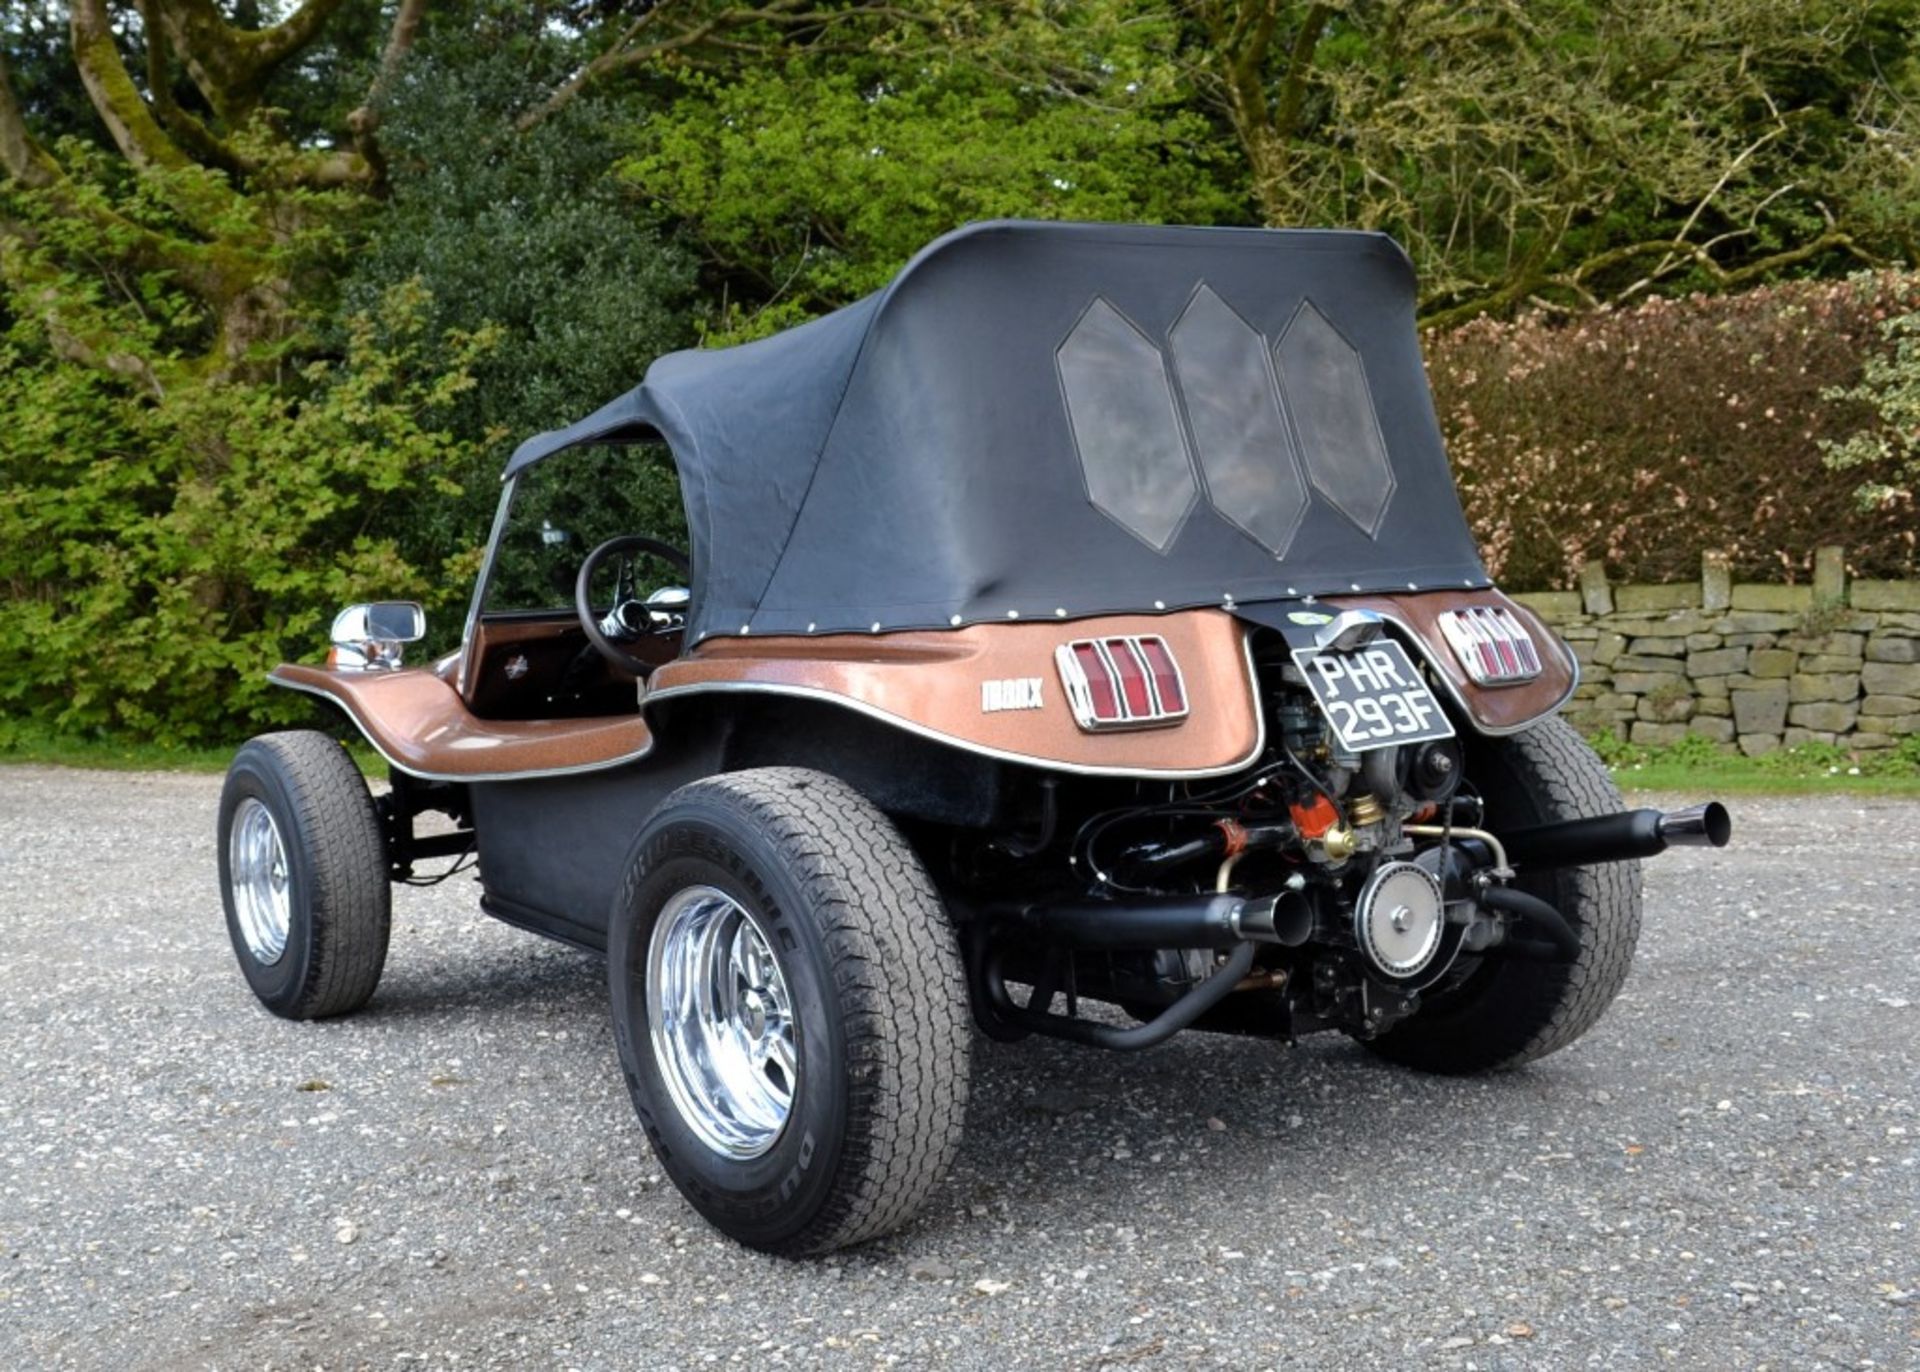 1968 Volkswagen Beach Buggy SWB ‘Meyers Manx Evocation’ No Reserve - Image 8 of 29